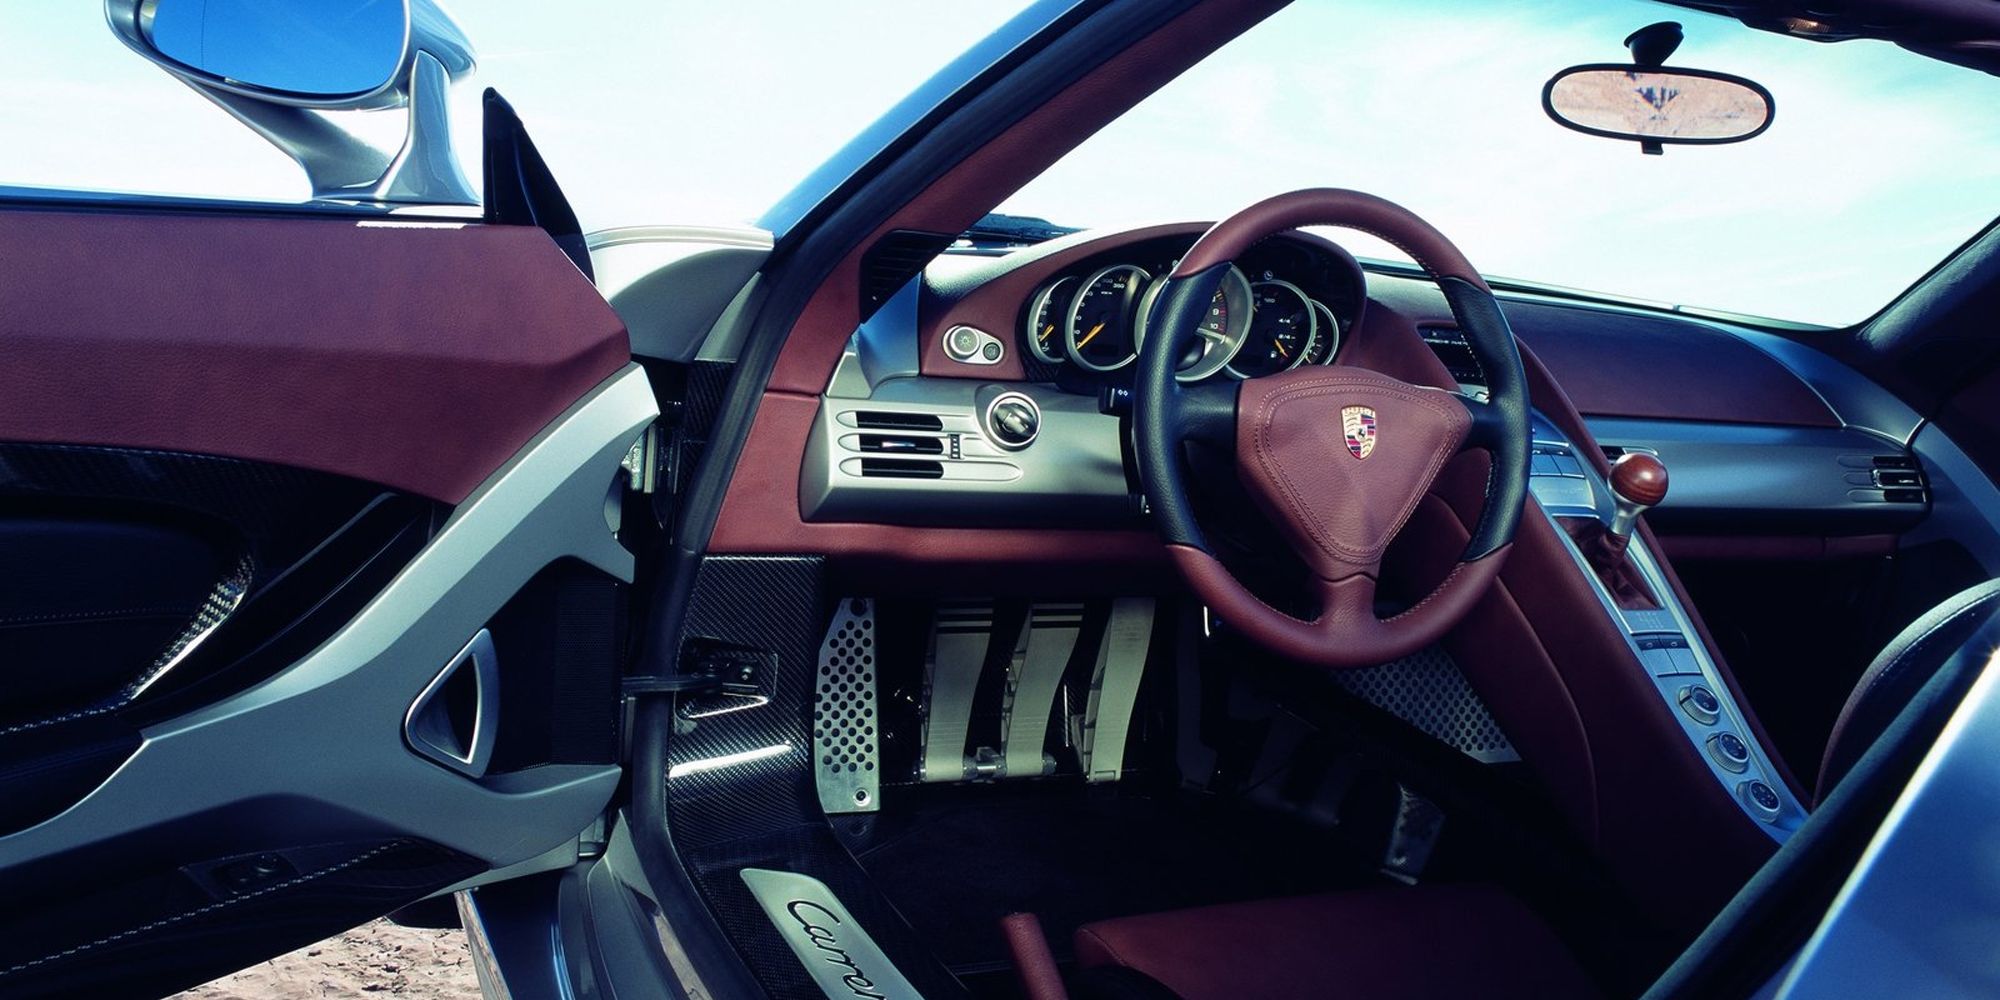 The interior of the Carrera GT